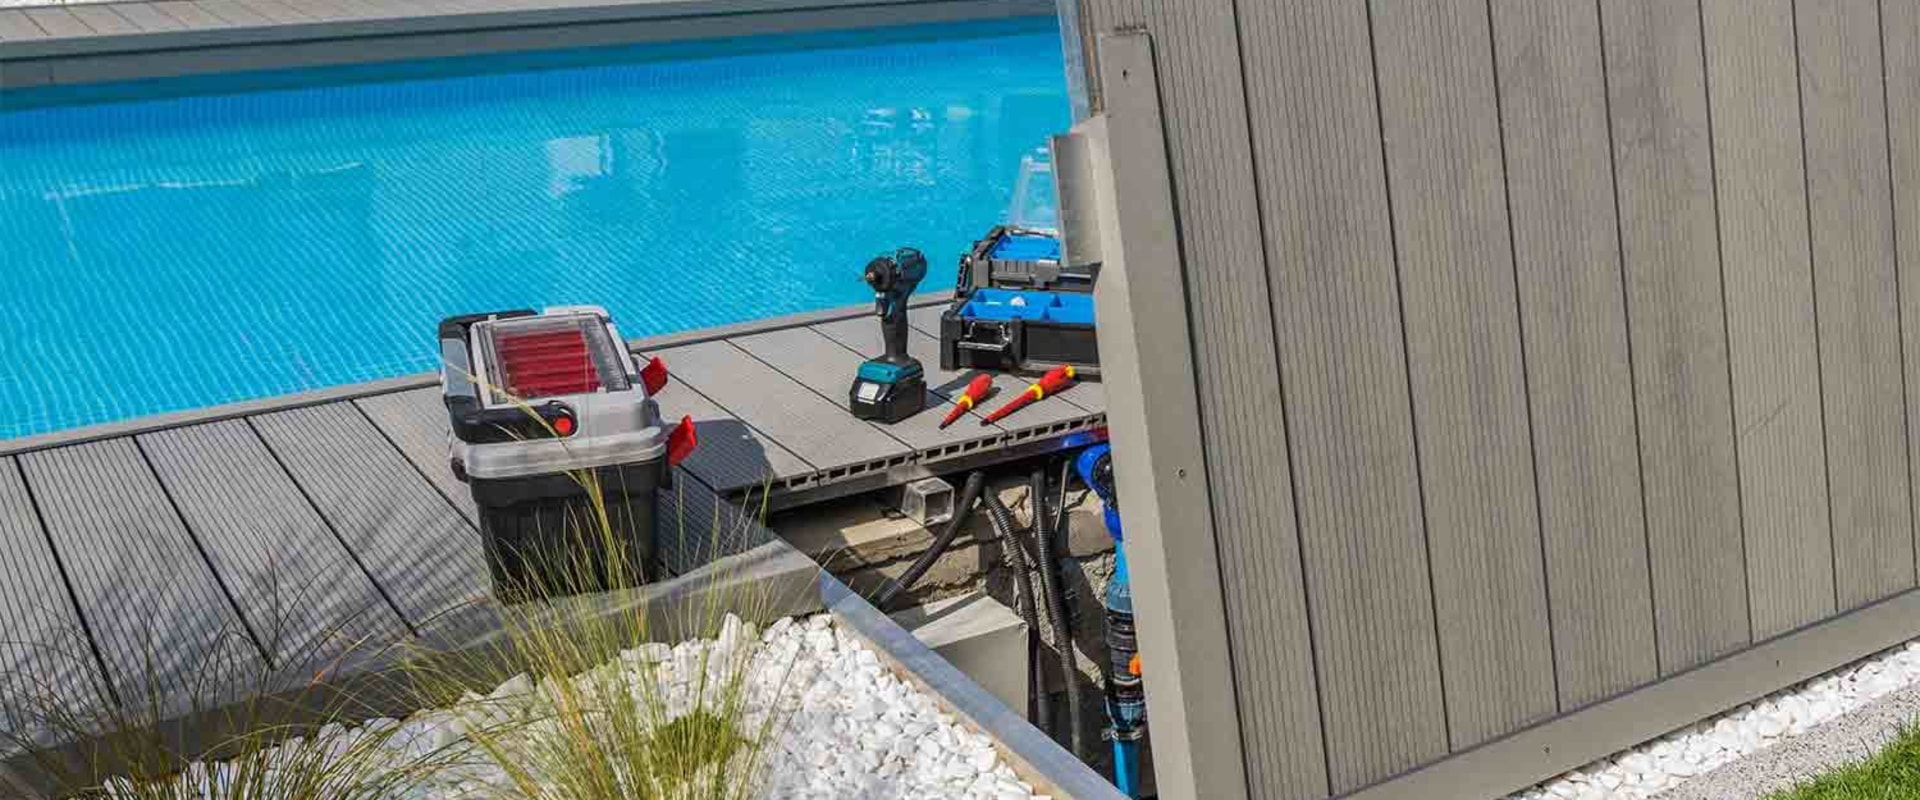 Maintaining a Pool Heater: A Complete Guide